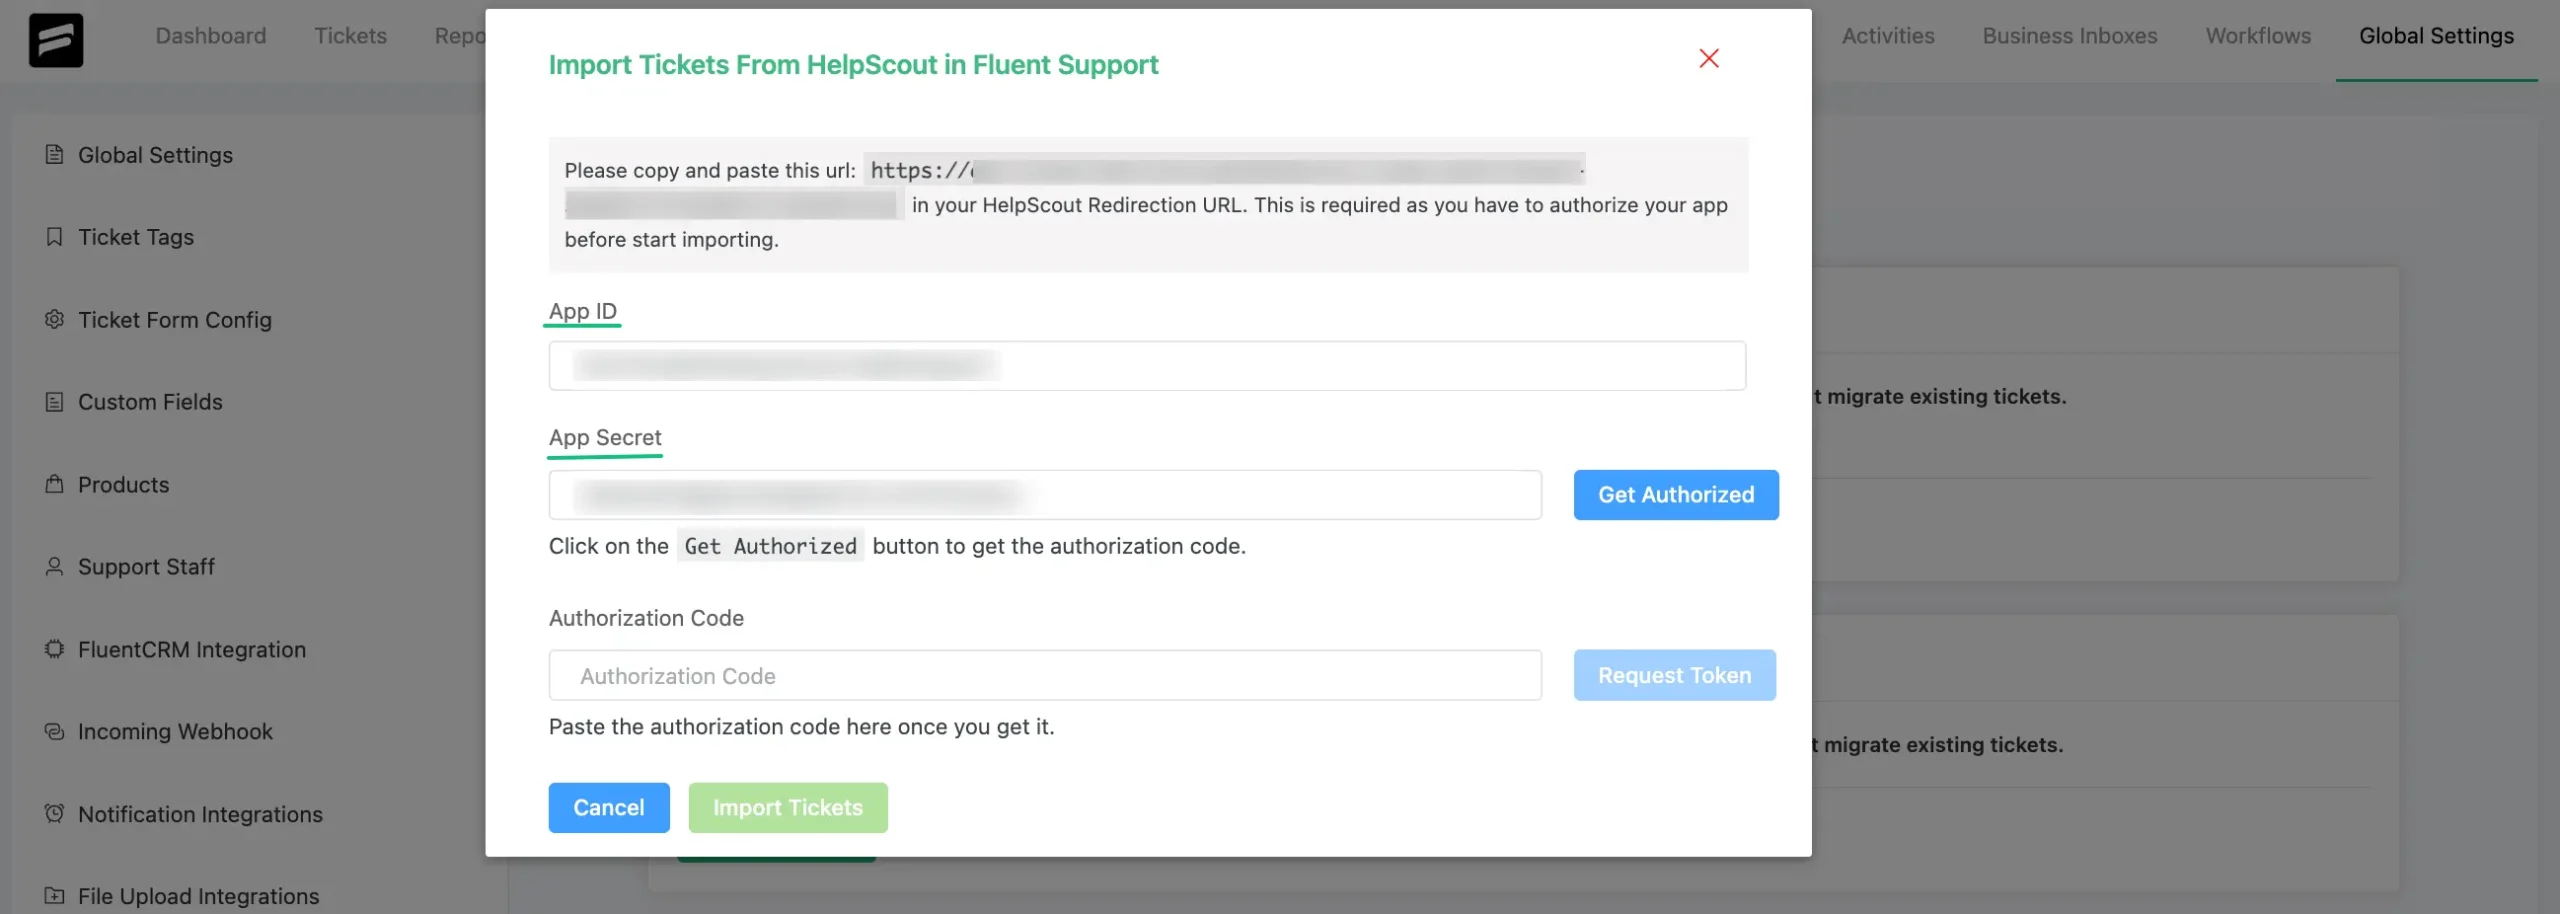 Import tickets from HelpScout popup in Fluent Support dashboard